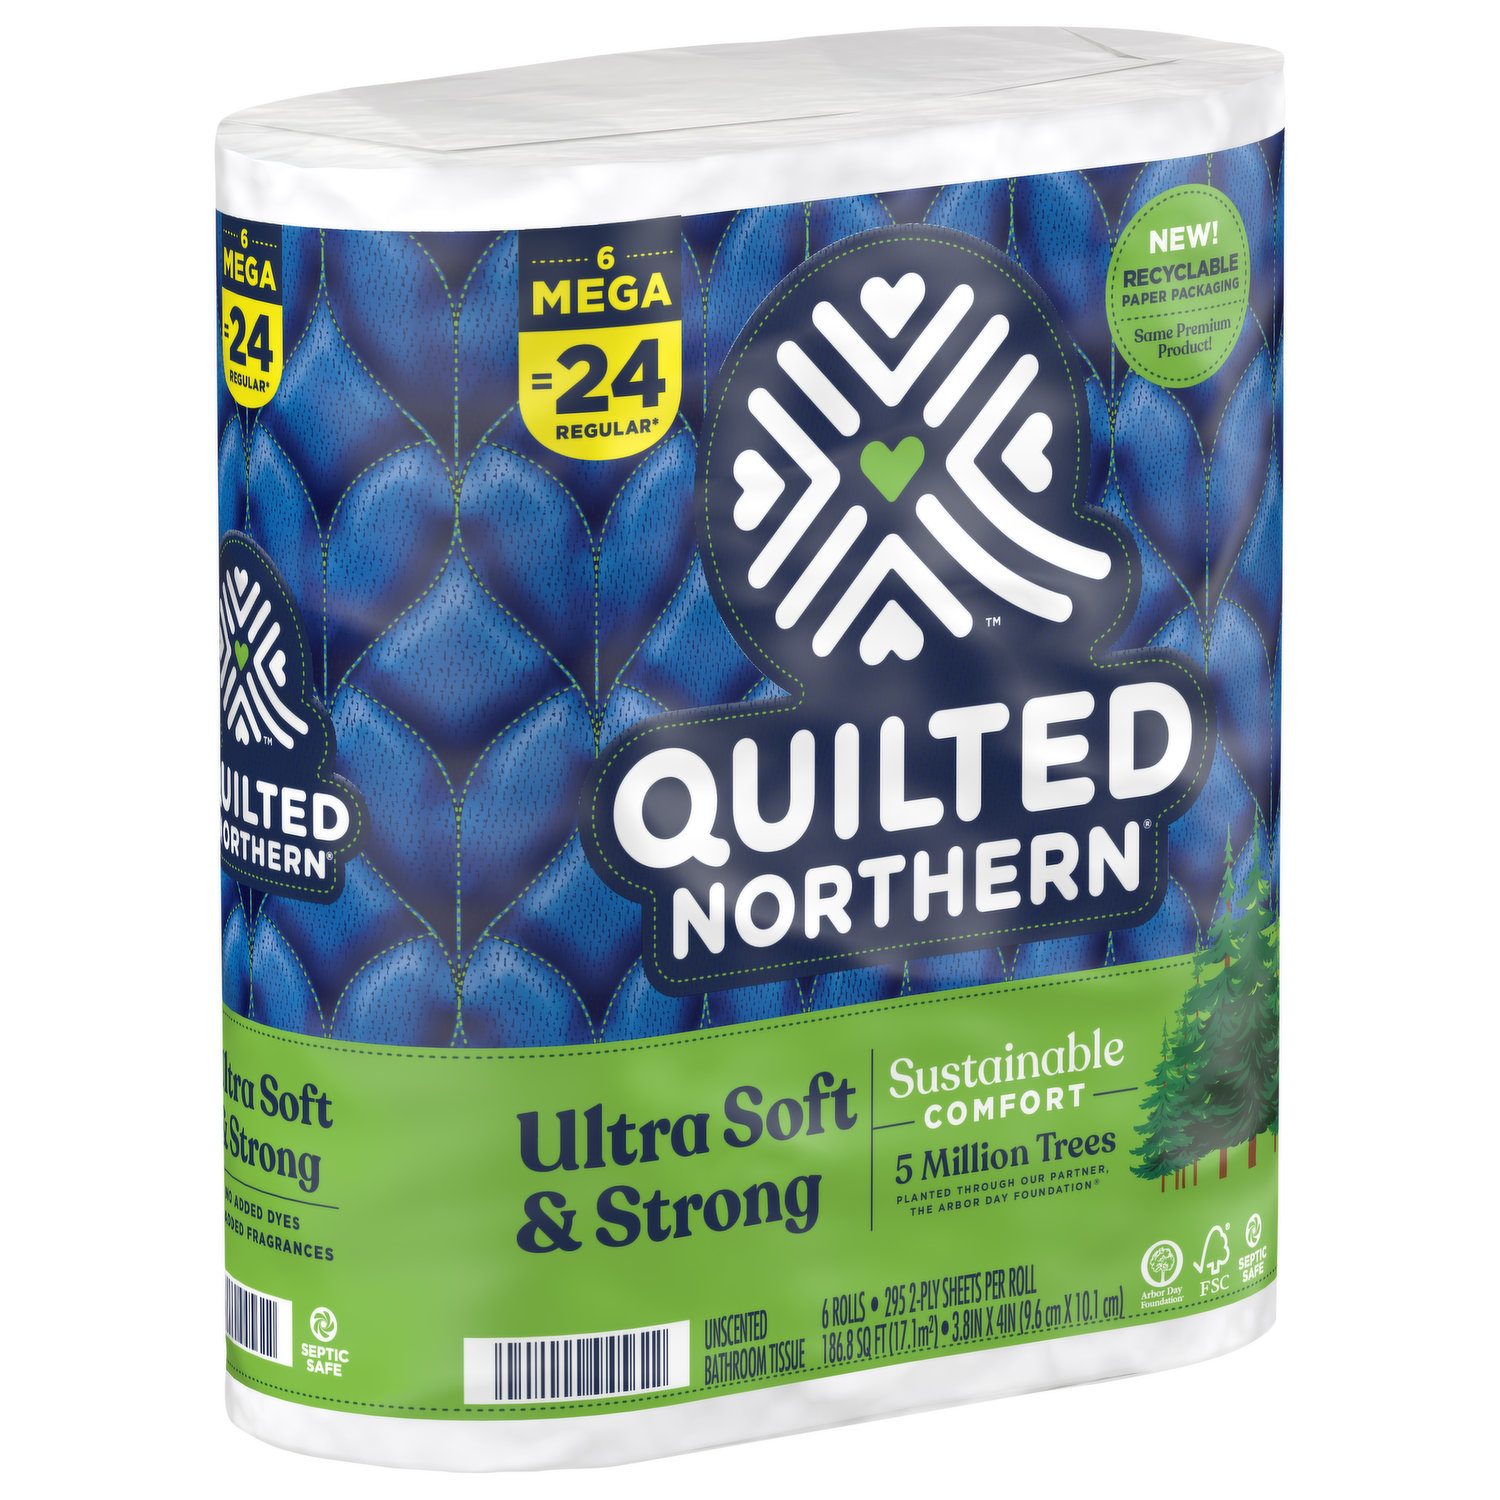 Quilted Northern Ultra Soft & Strong Toilet Paper Mega Roll 6 Rolls